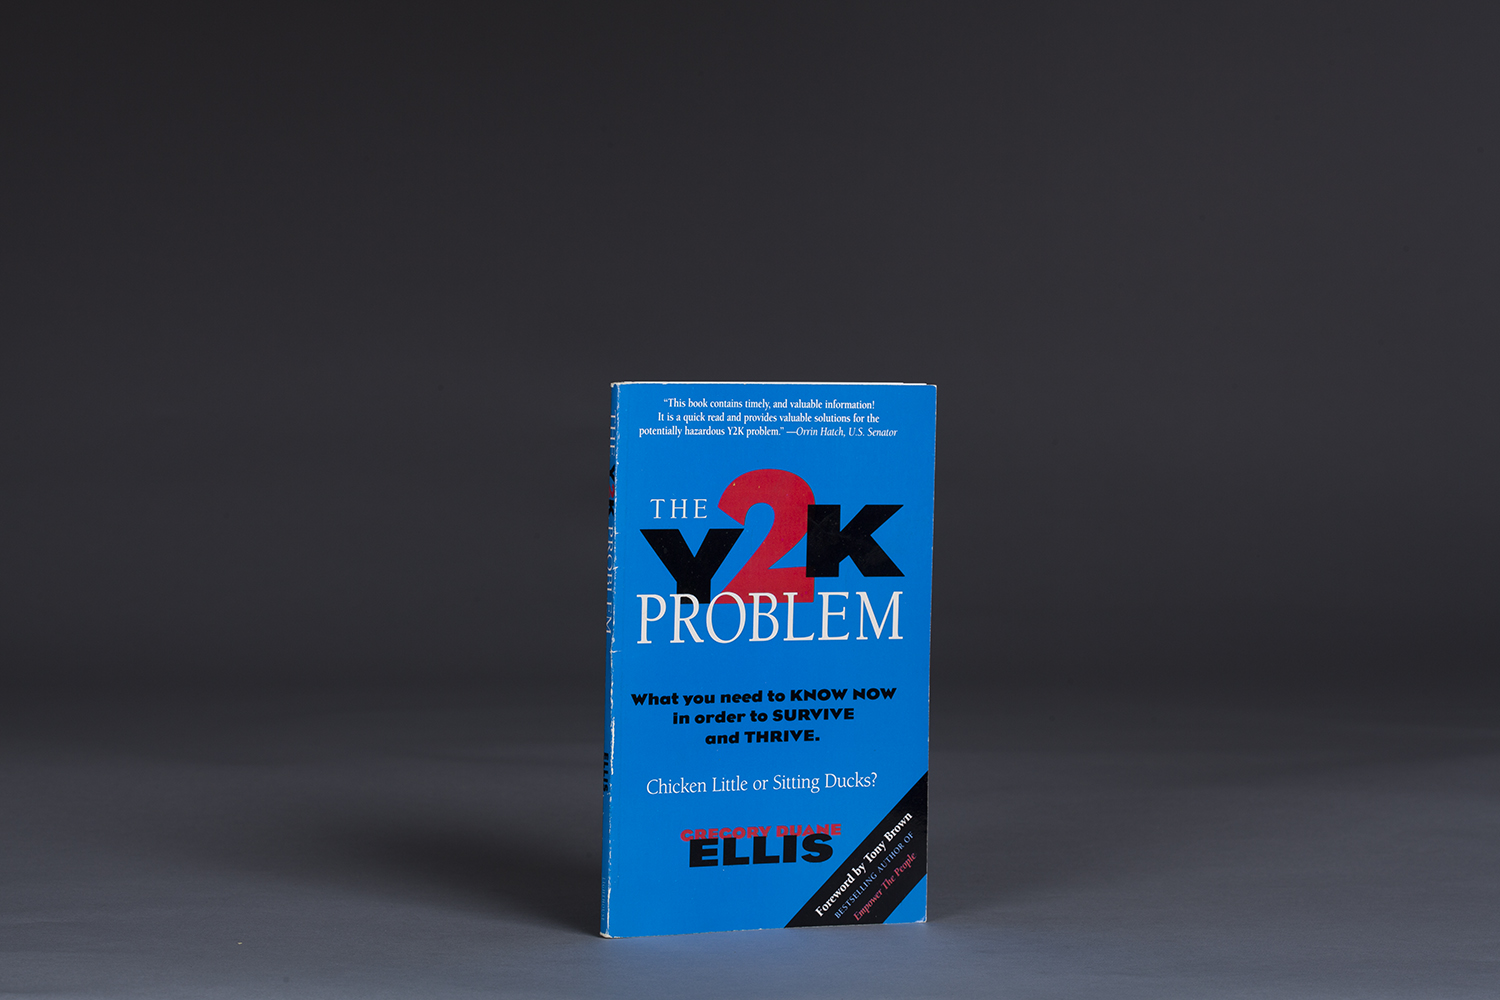 The Y2K Problem - 9843 Cover.jpg